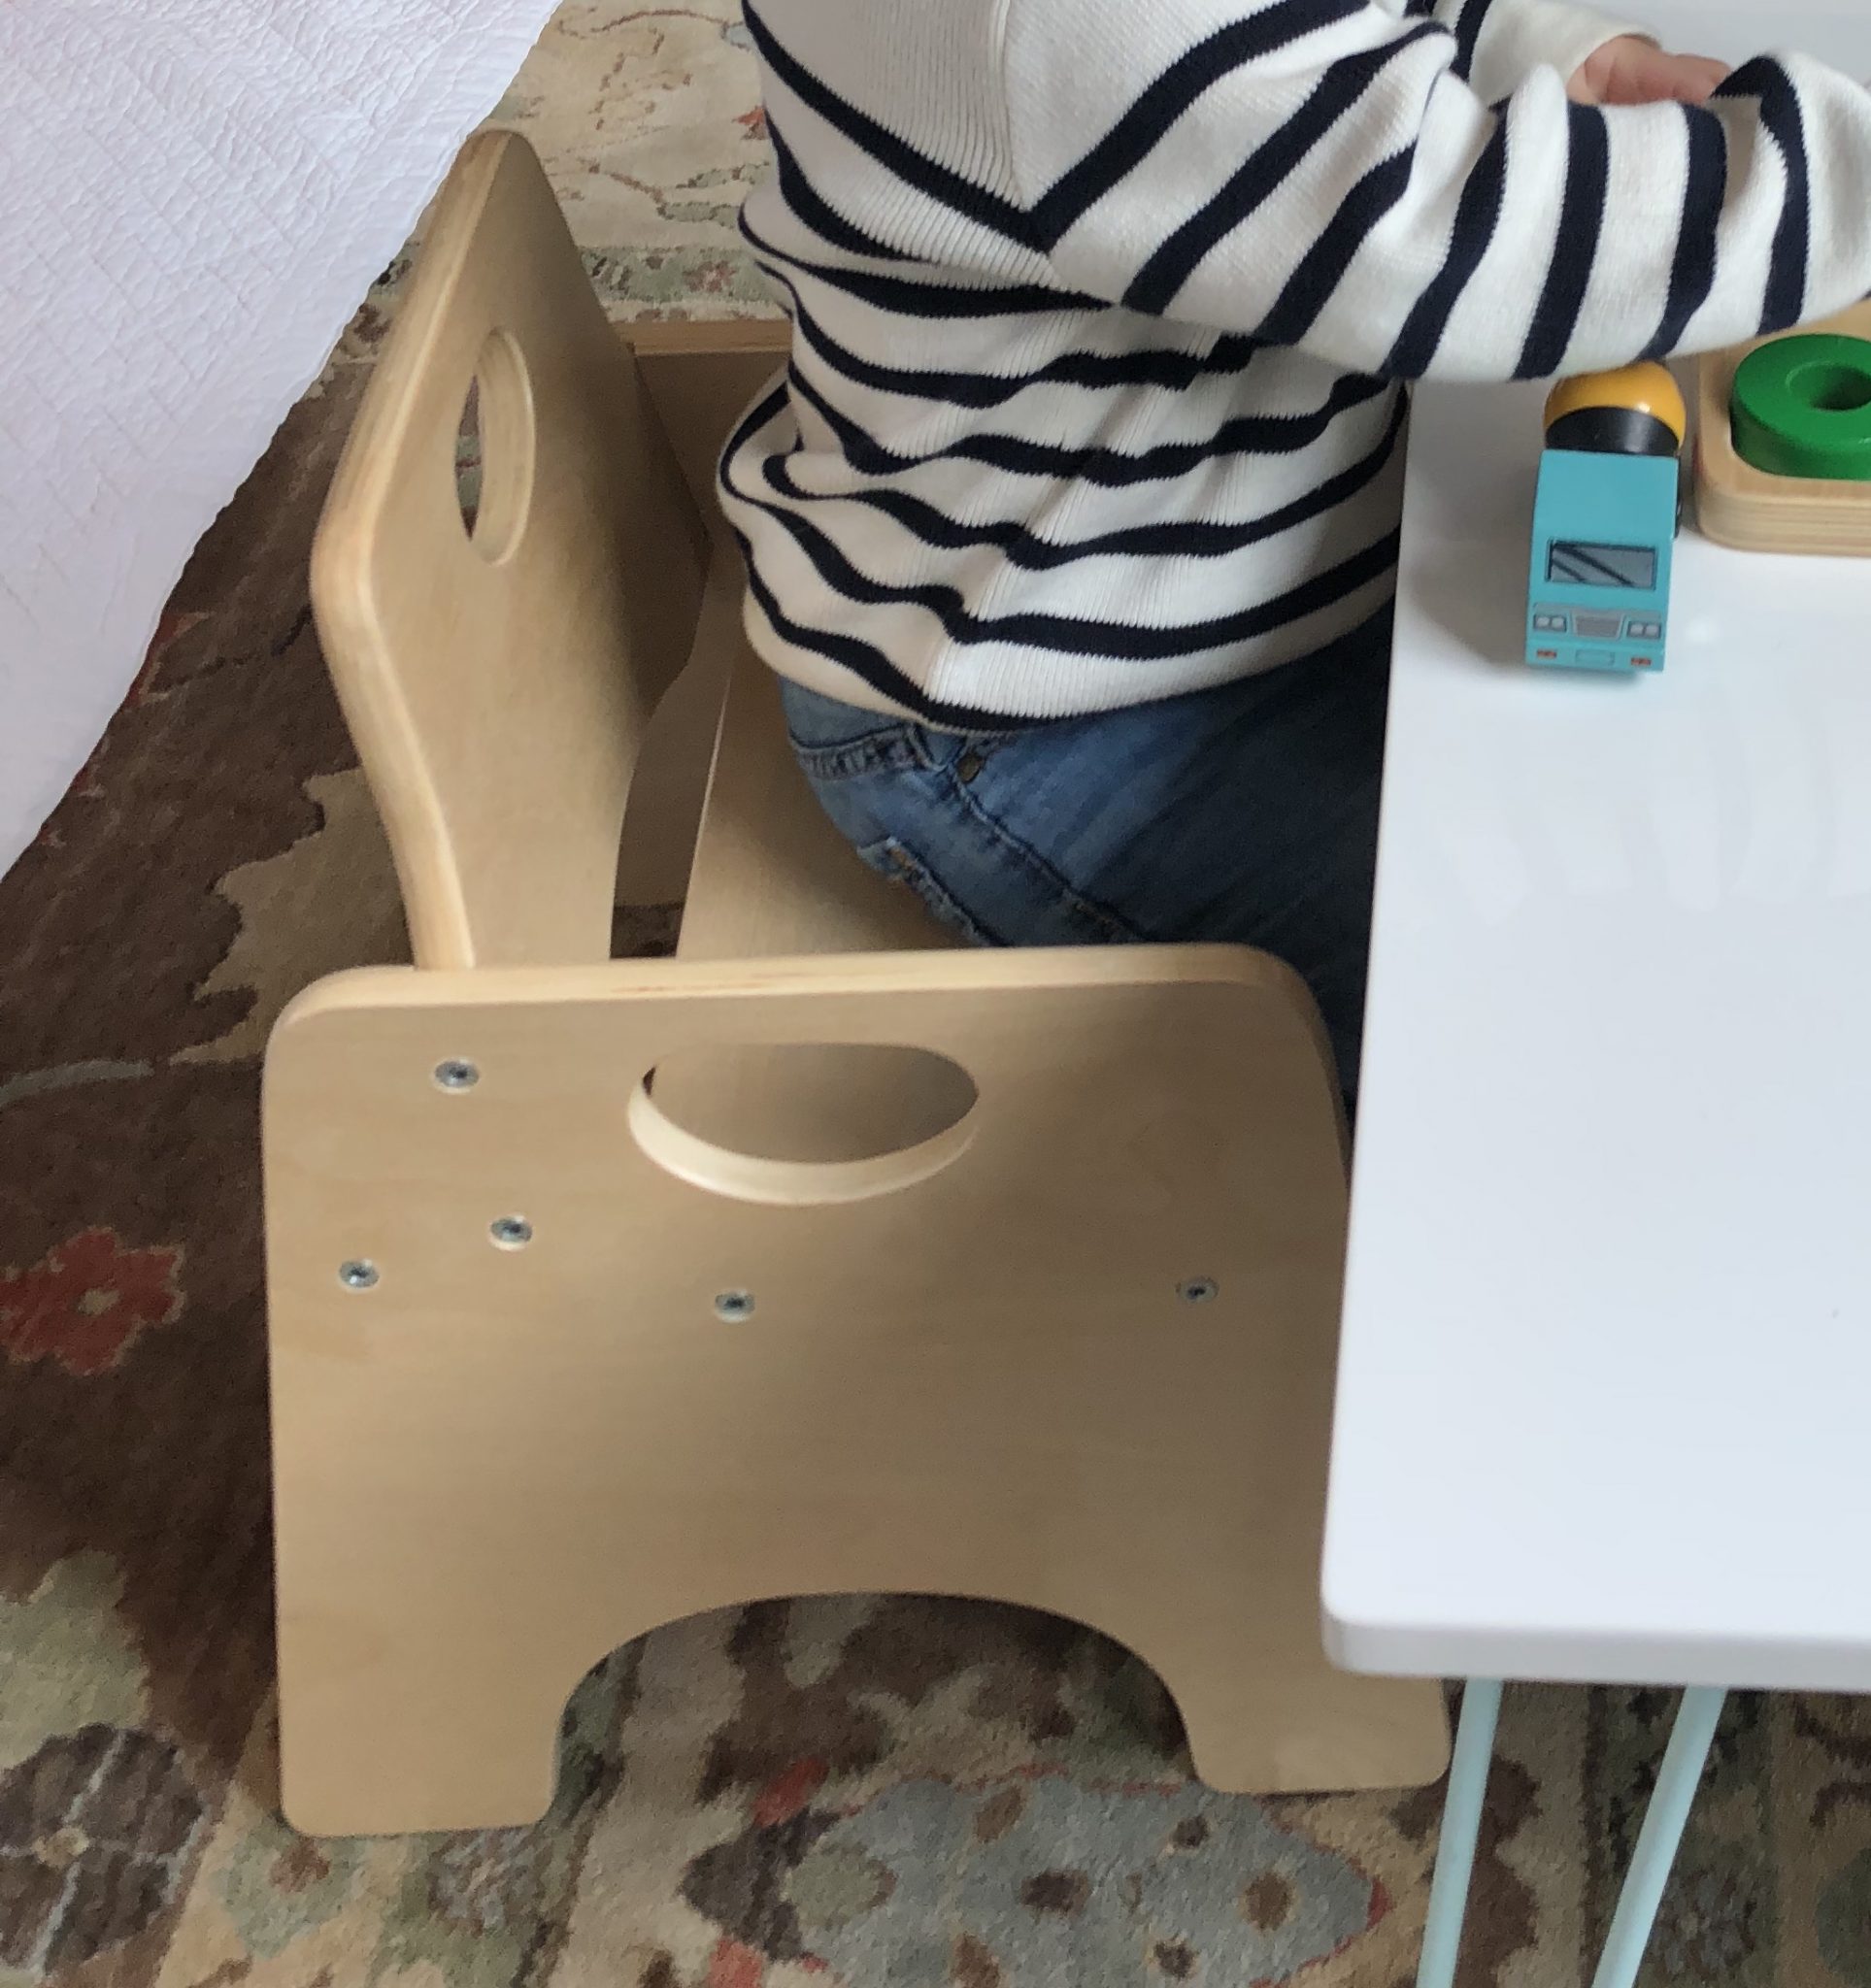 ecr4kids table and chair set